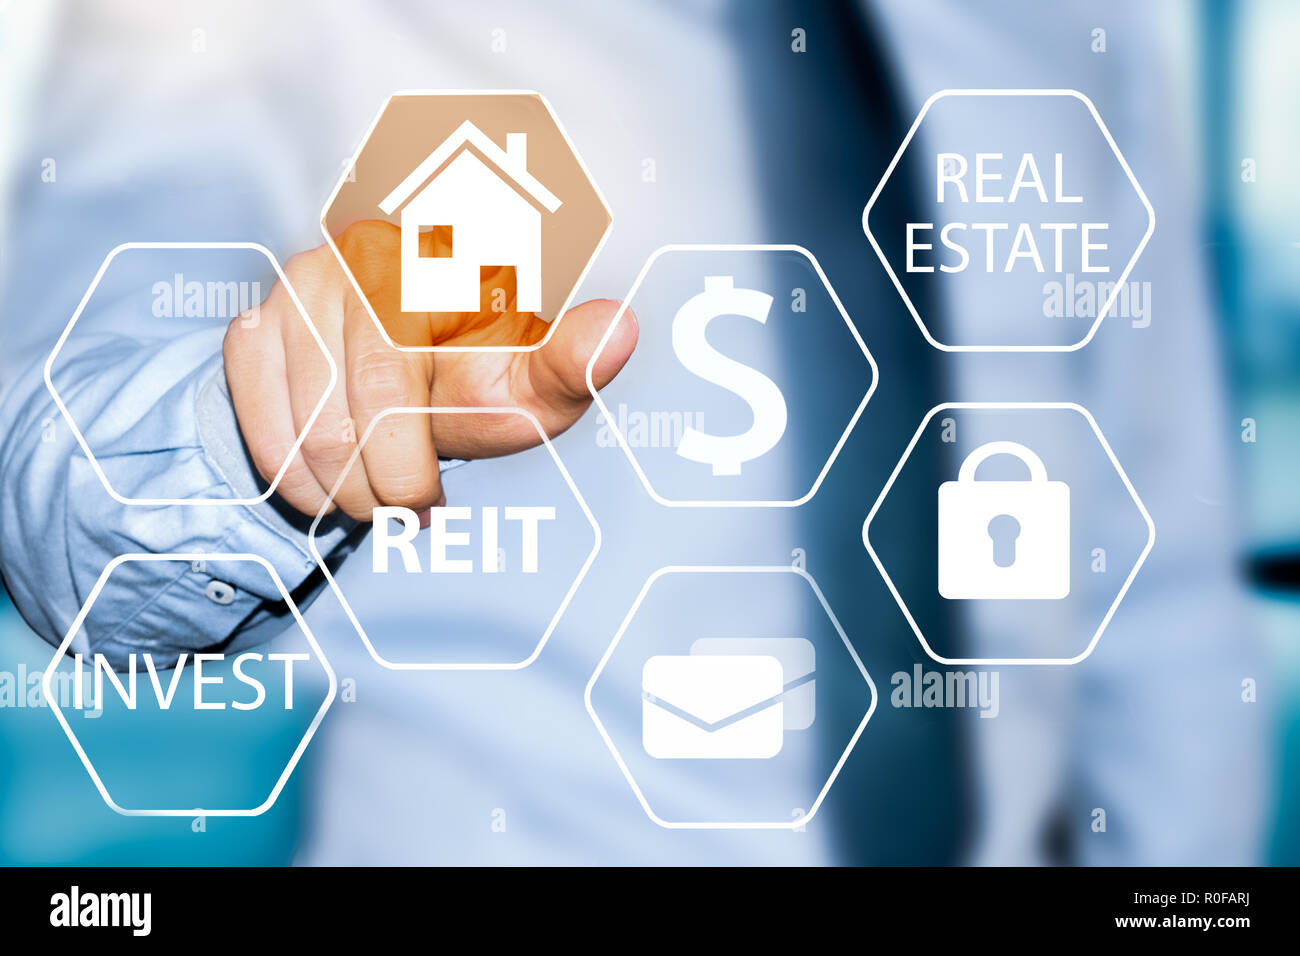 real estate investment Stock Photo